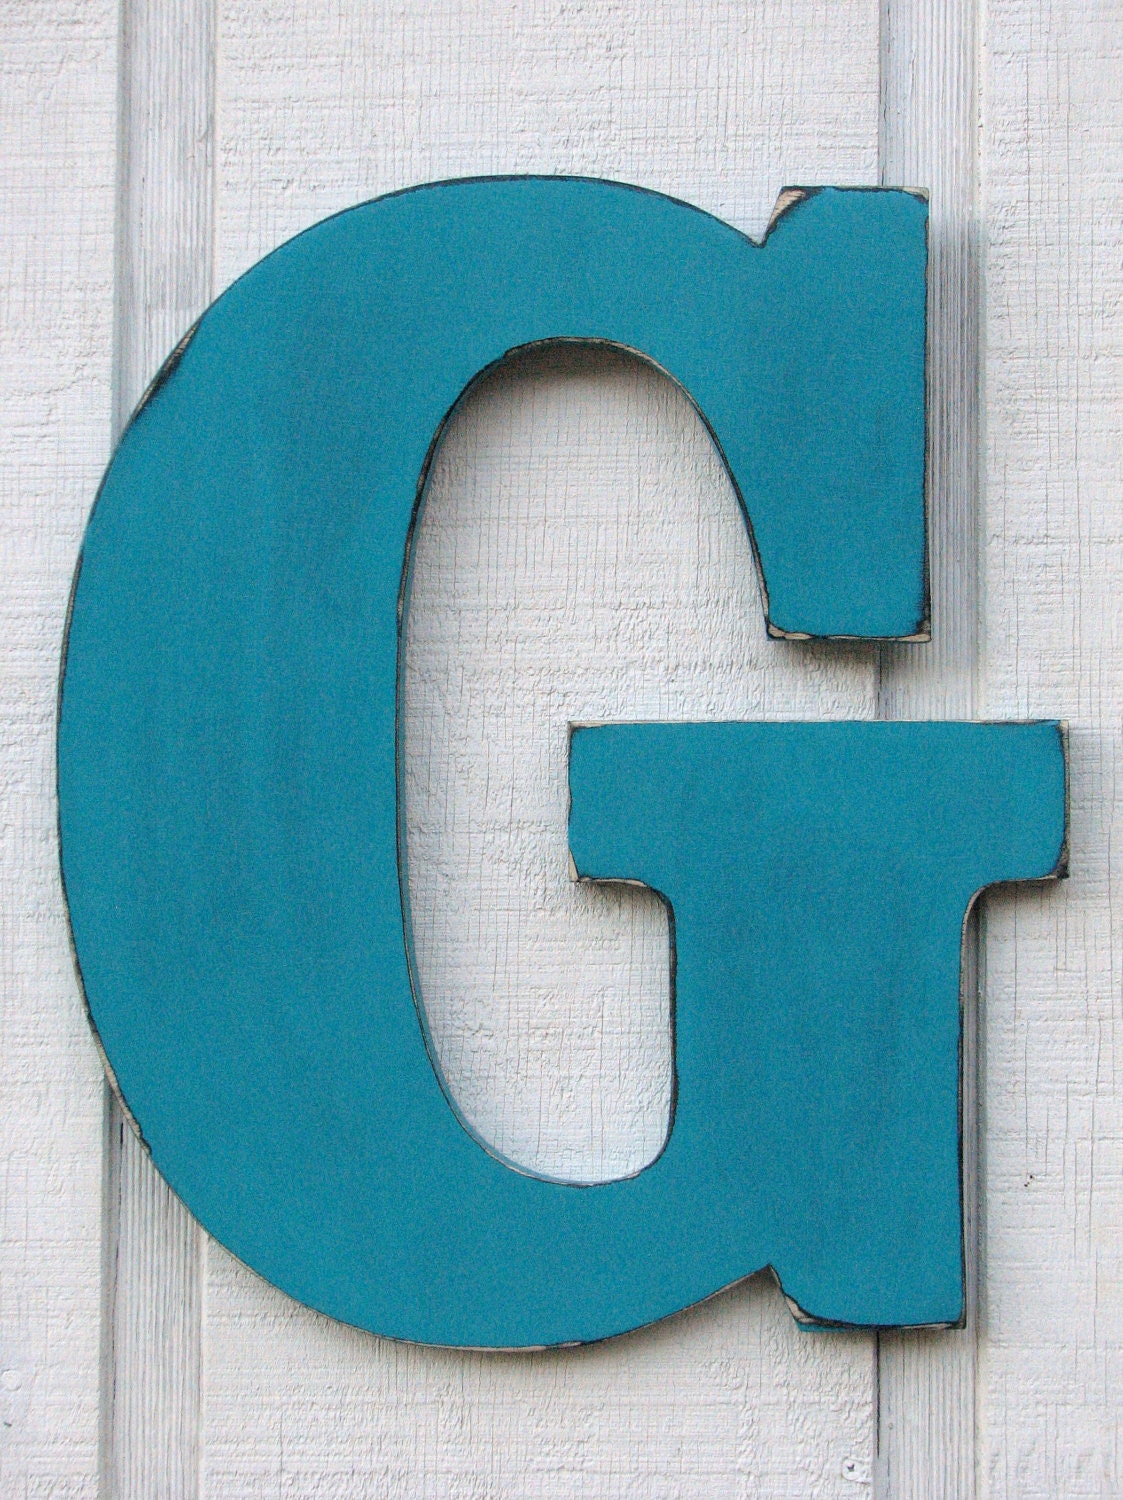 Guestbook Large Wall Letters Rustic Wooden Letter G Distressed